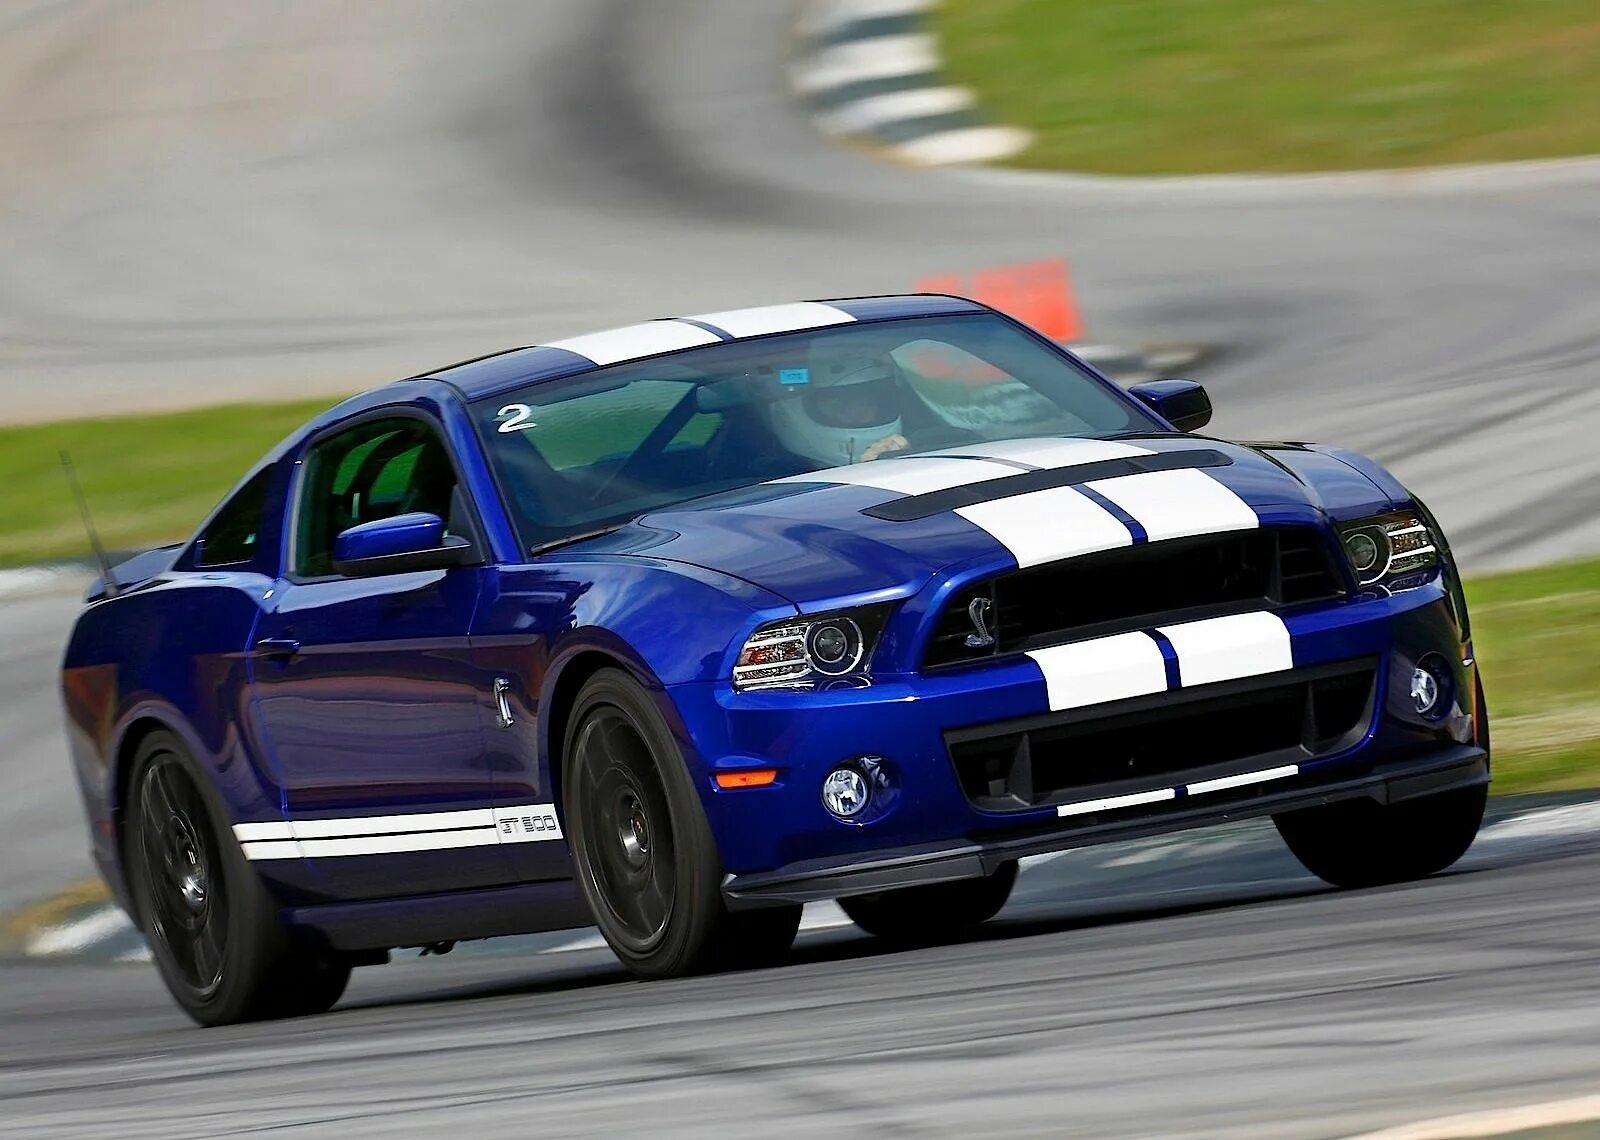 Mustang shelby gt. Форд Мустанг gt 500 Shelby. Ford Shelby gt500. Ford Mustang gt500. Ford Mustang Shelby gt500 2011.